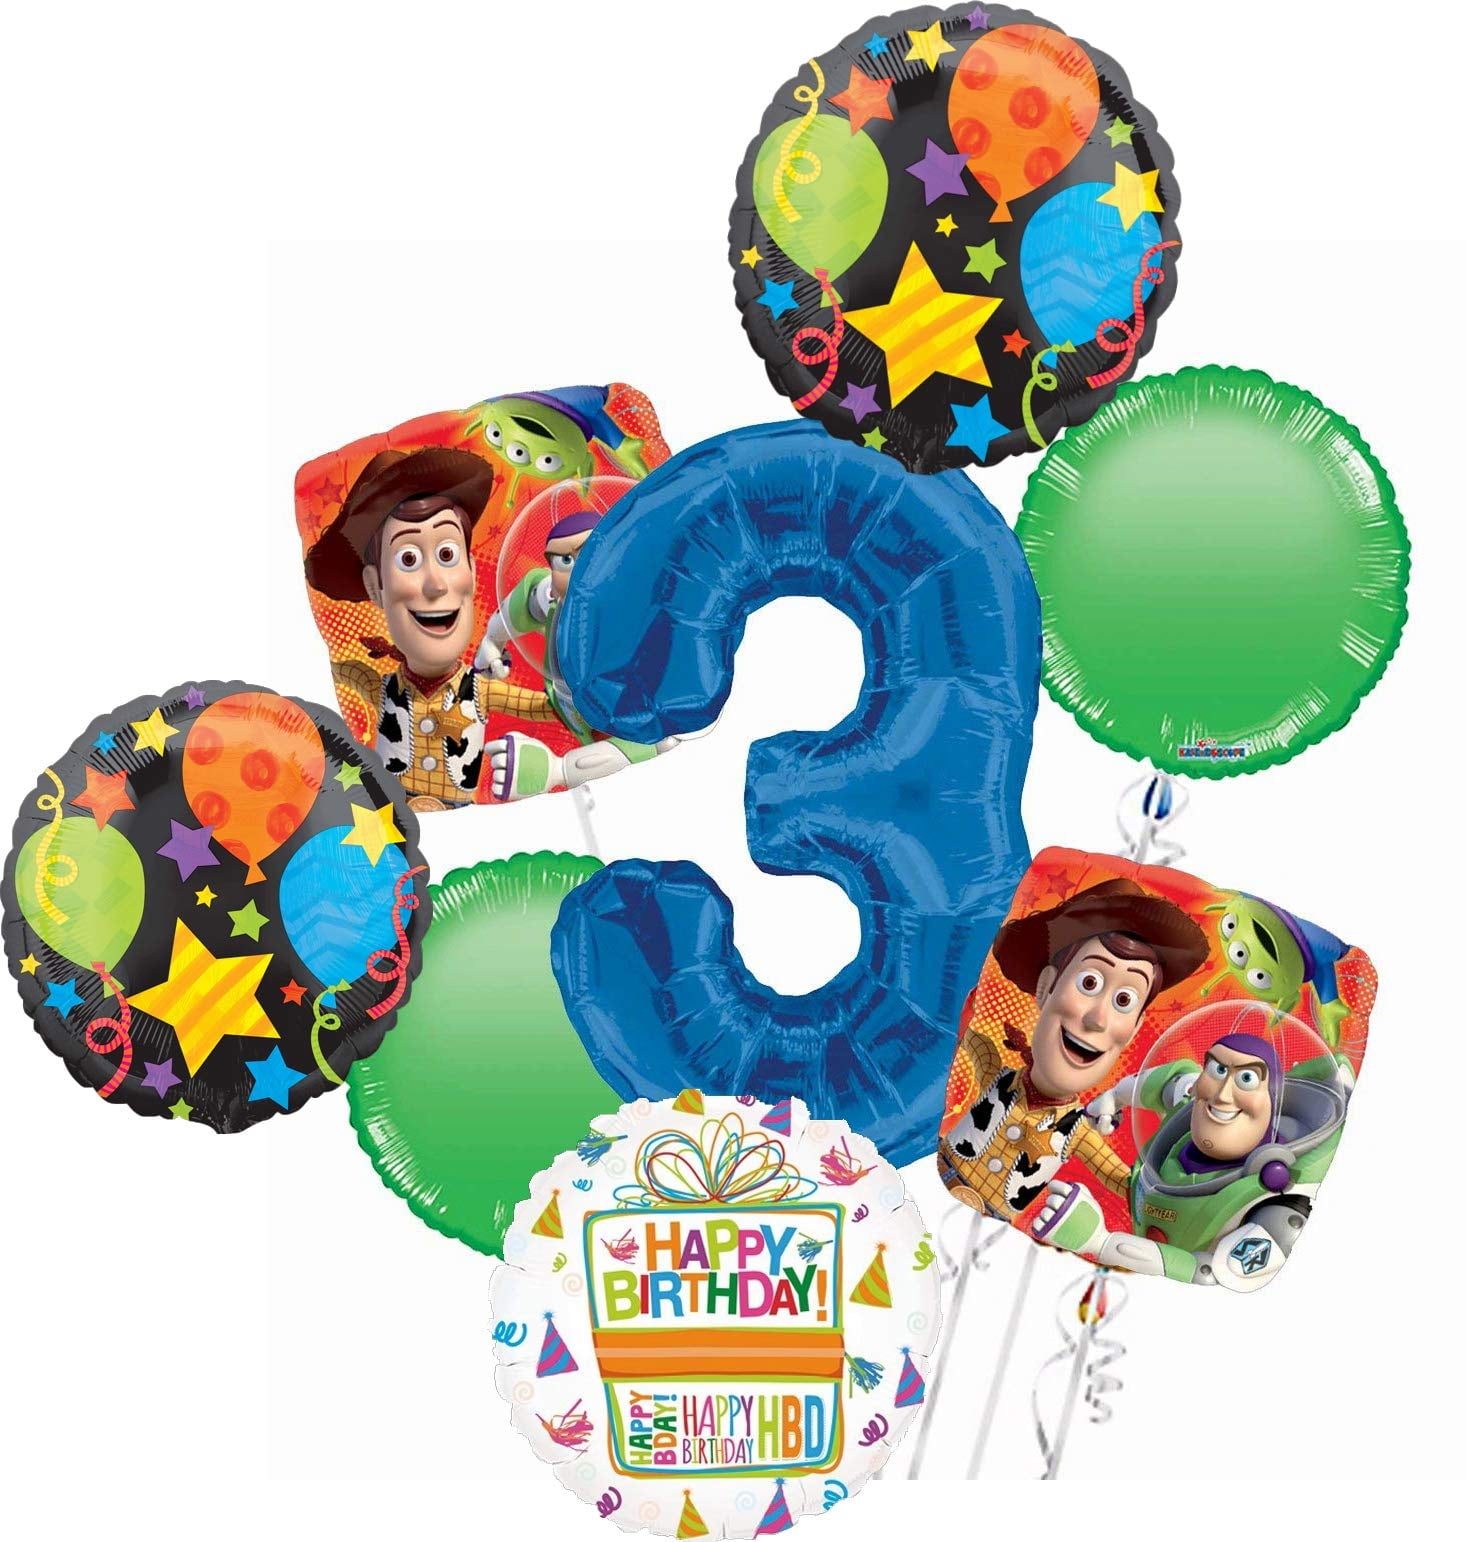 Disney Toy Story Buzz Lightyear Party Favor Birthday Bouquet Balloons 